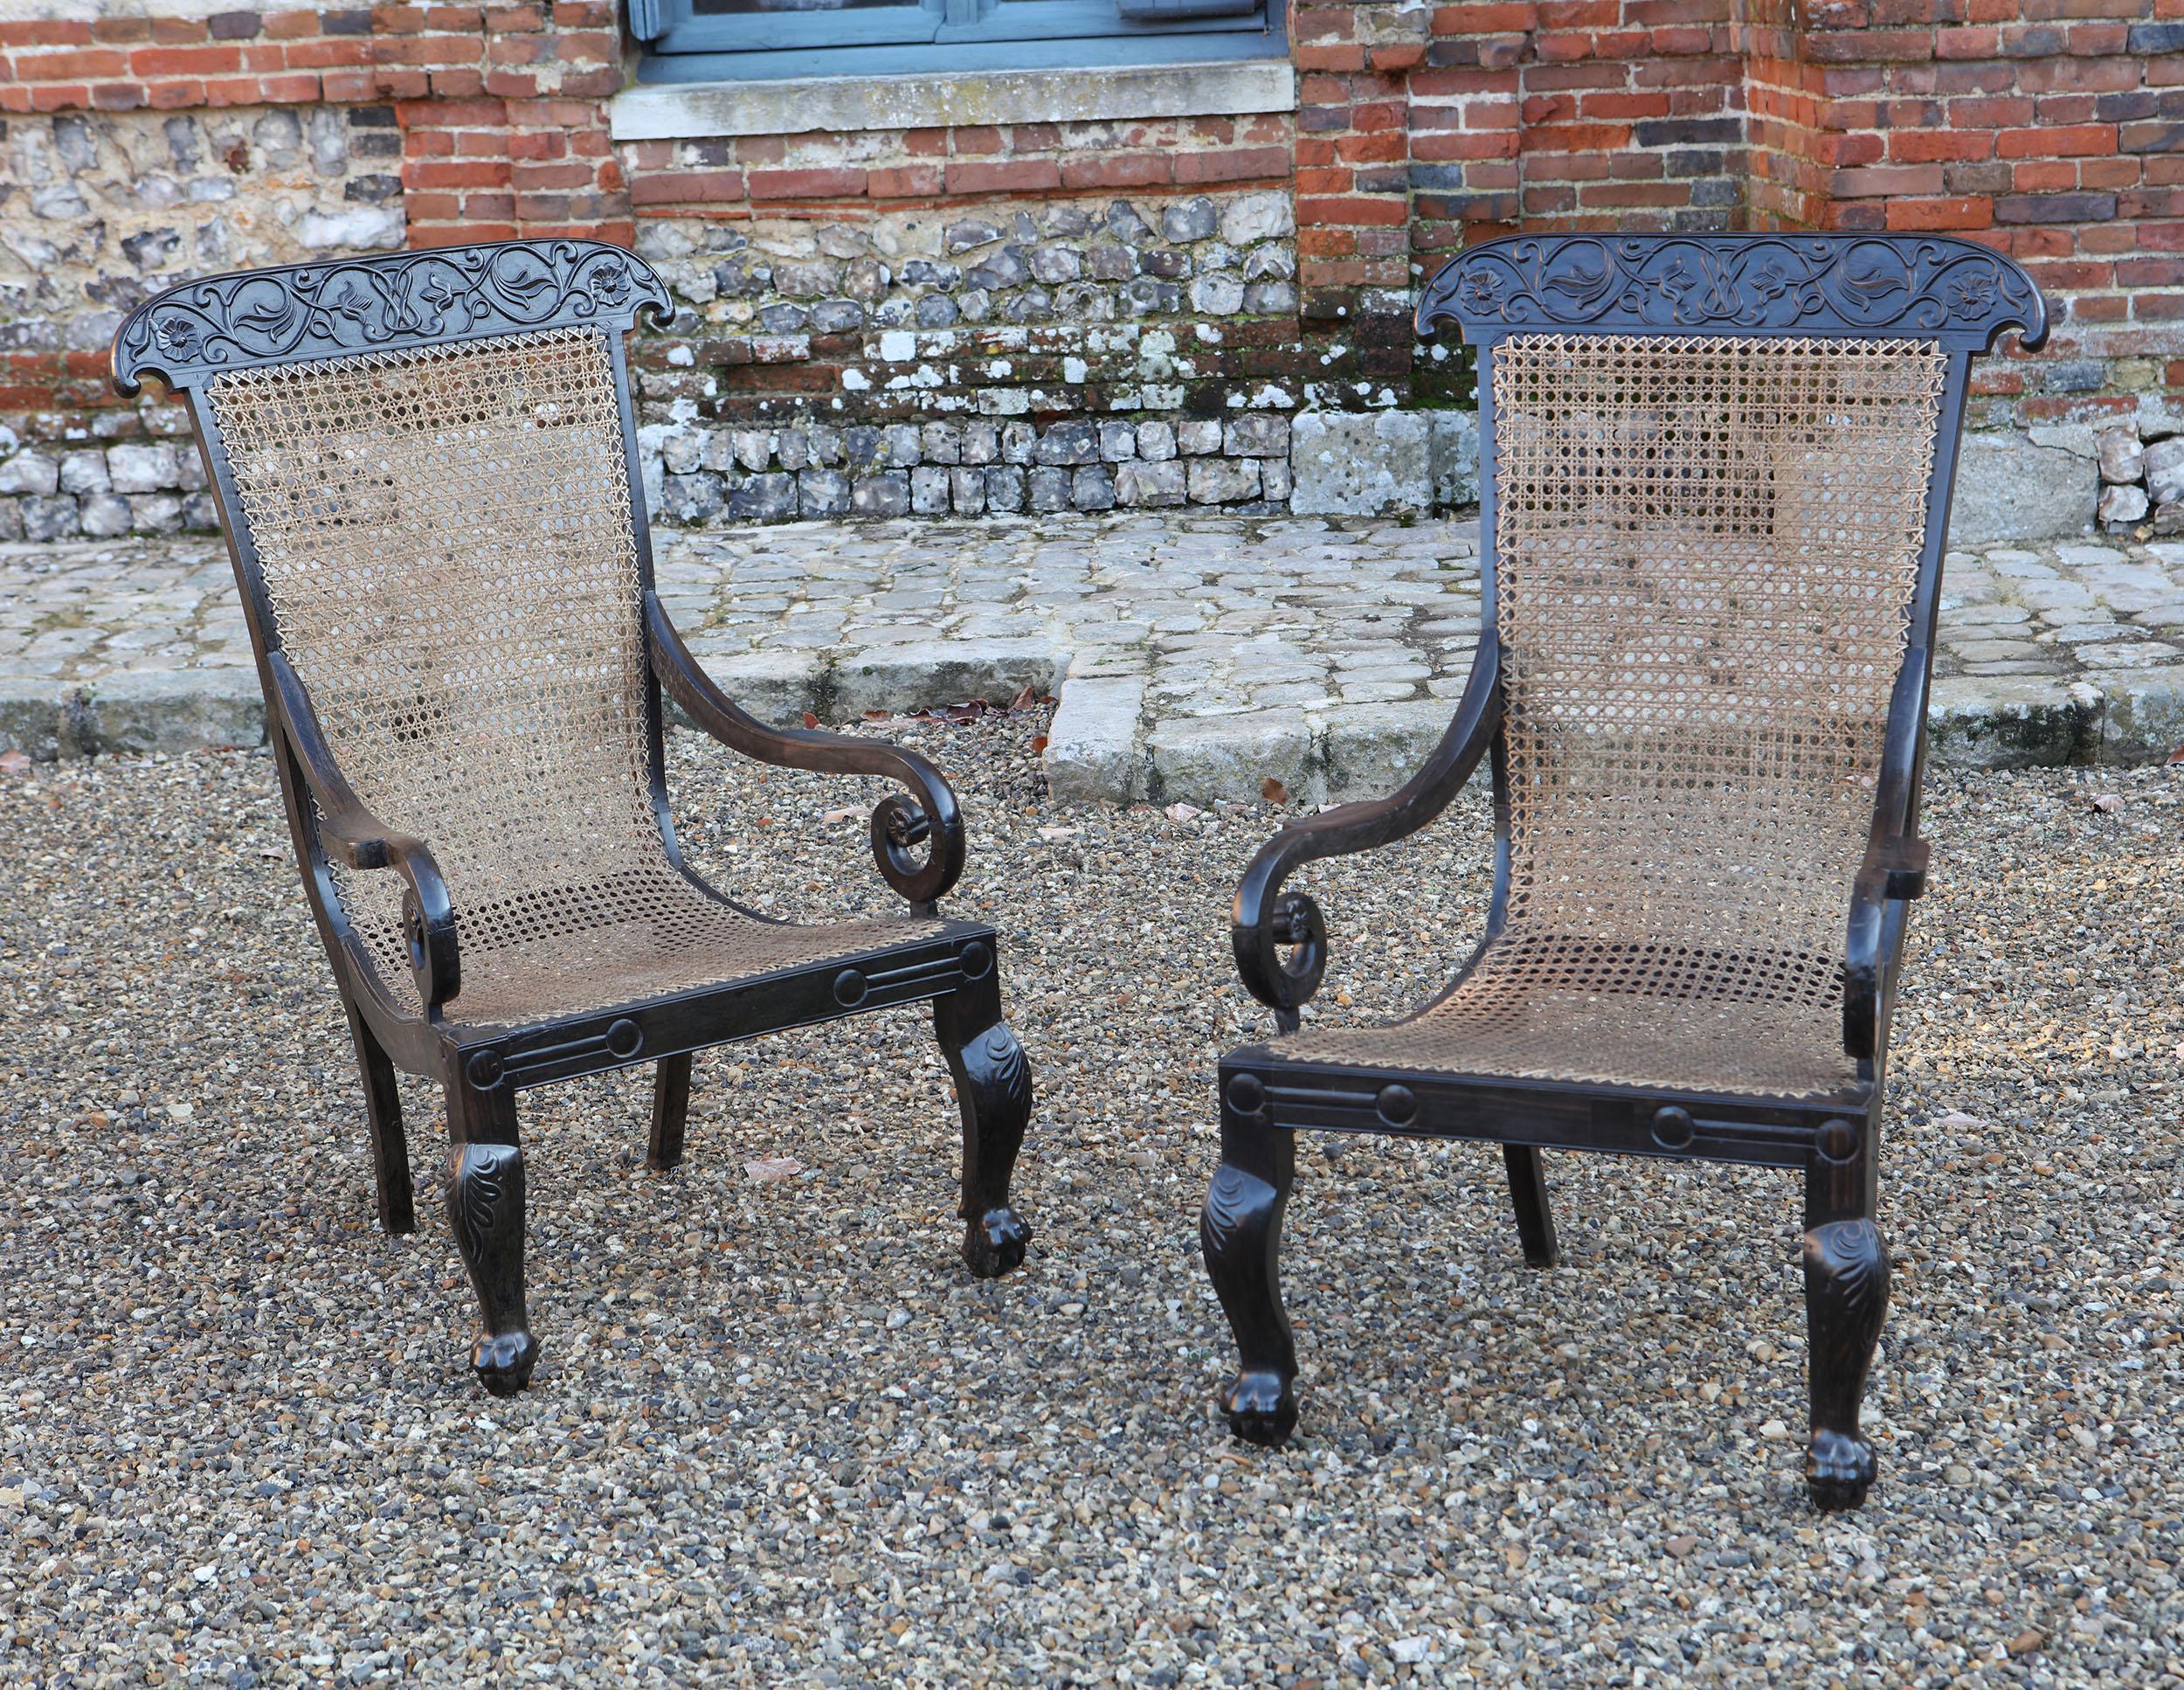 Pair of Anglo-Indian solid ebony caned armchairs, the ebony frames carved with delicate trailing vines across the top rails, the sweeping frames with scroll arms and raised on cabriole legs with claw feet.
India, circa 1850

Measures: Height